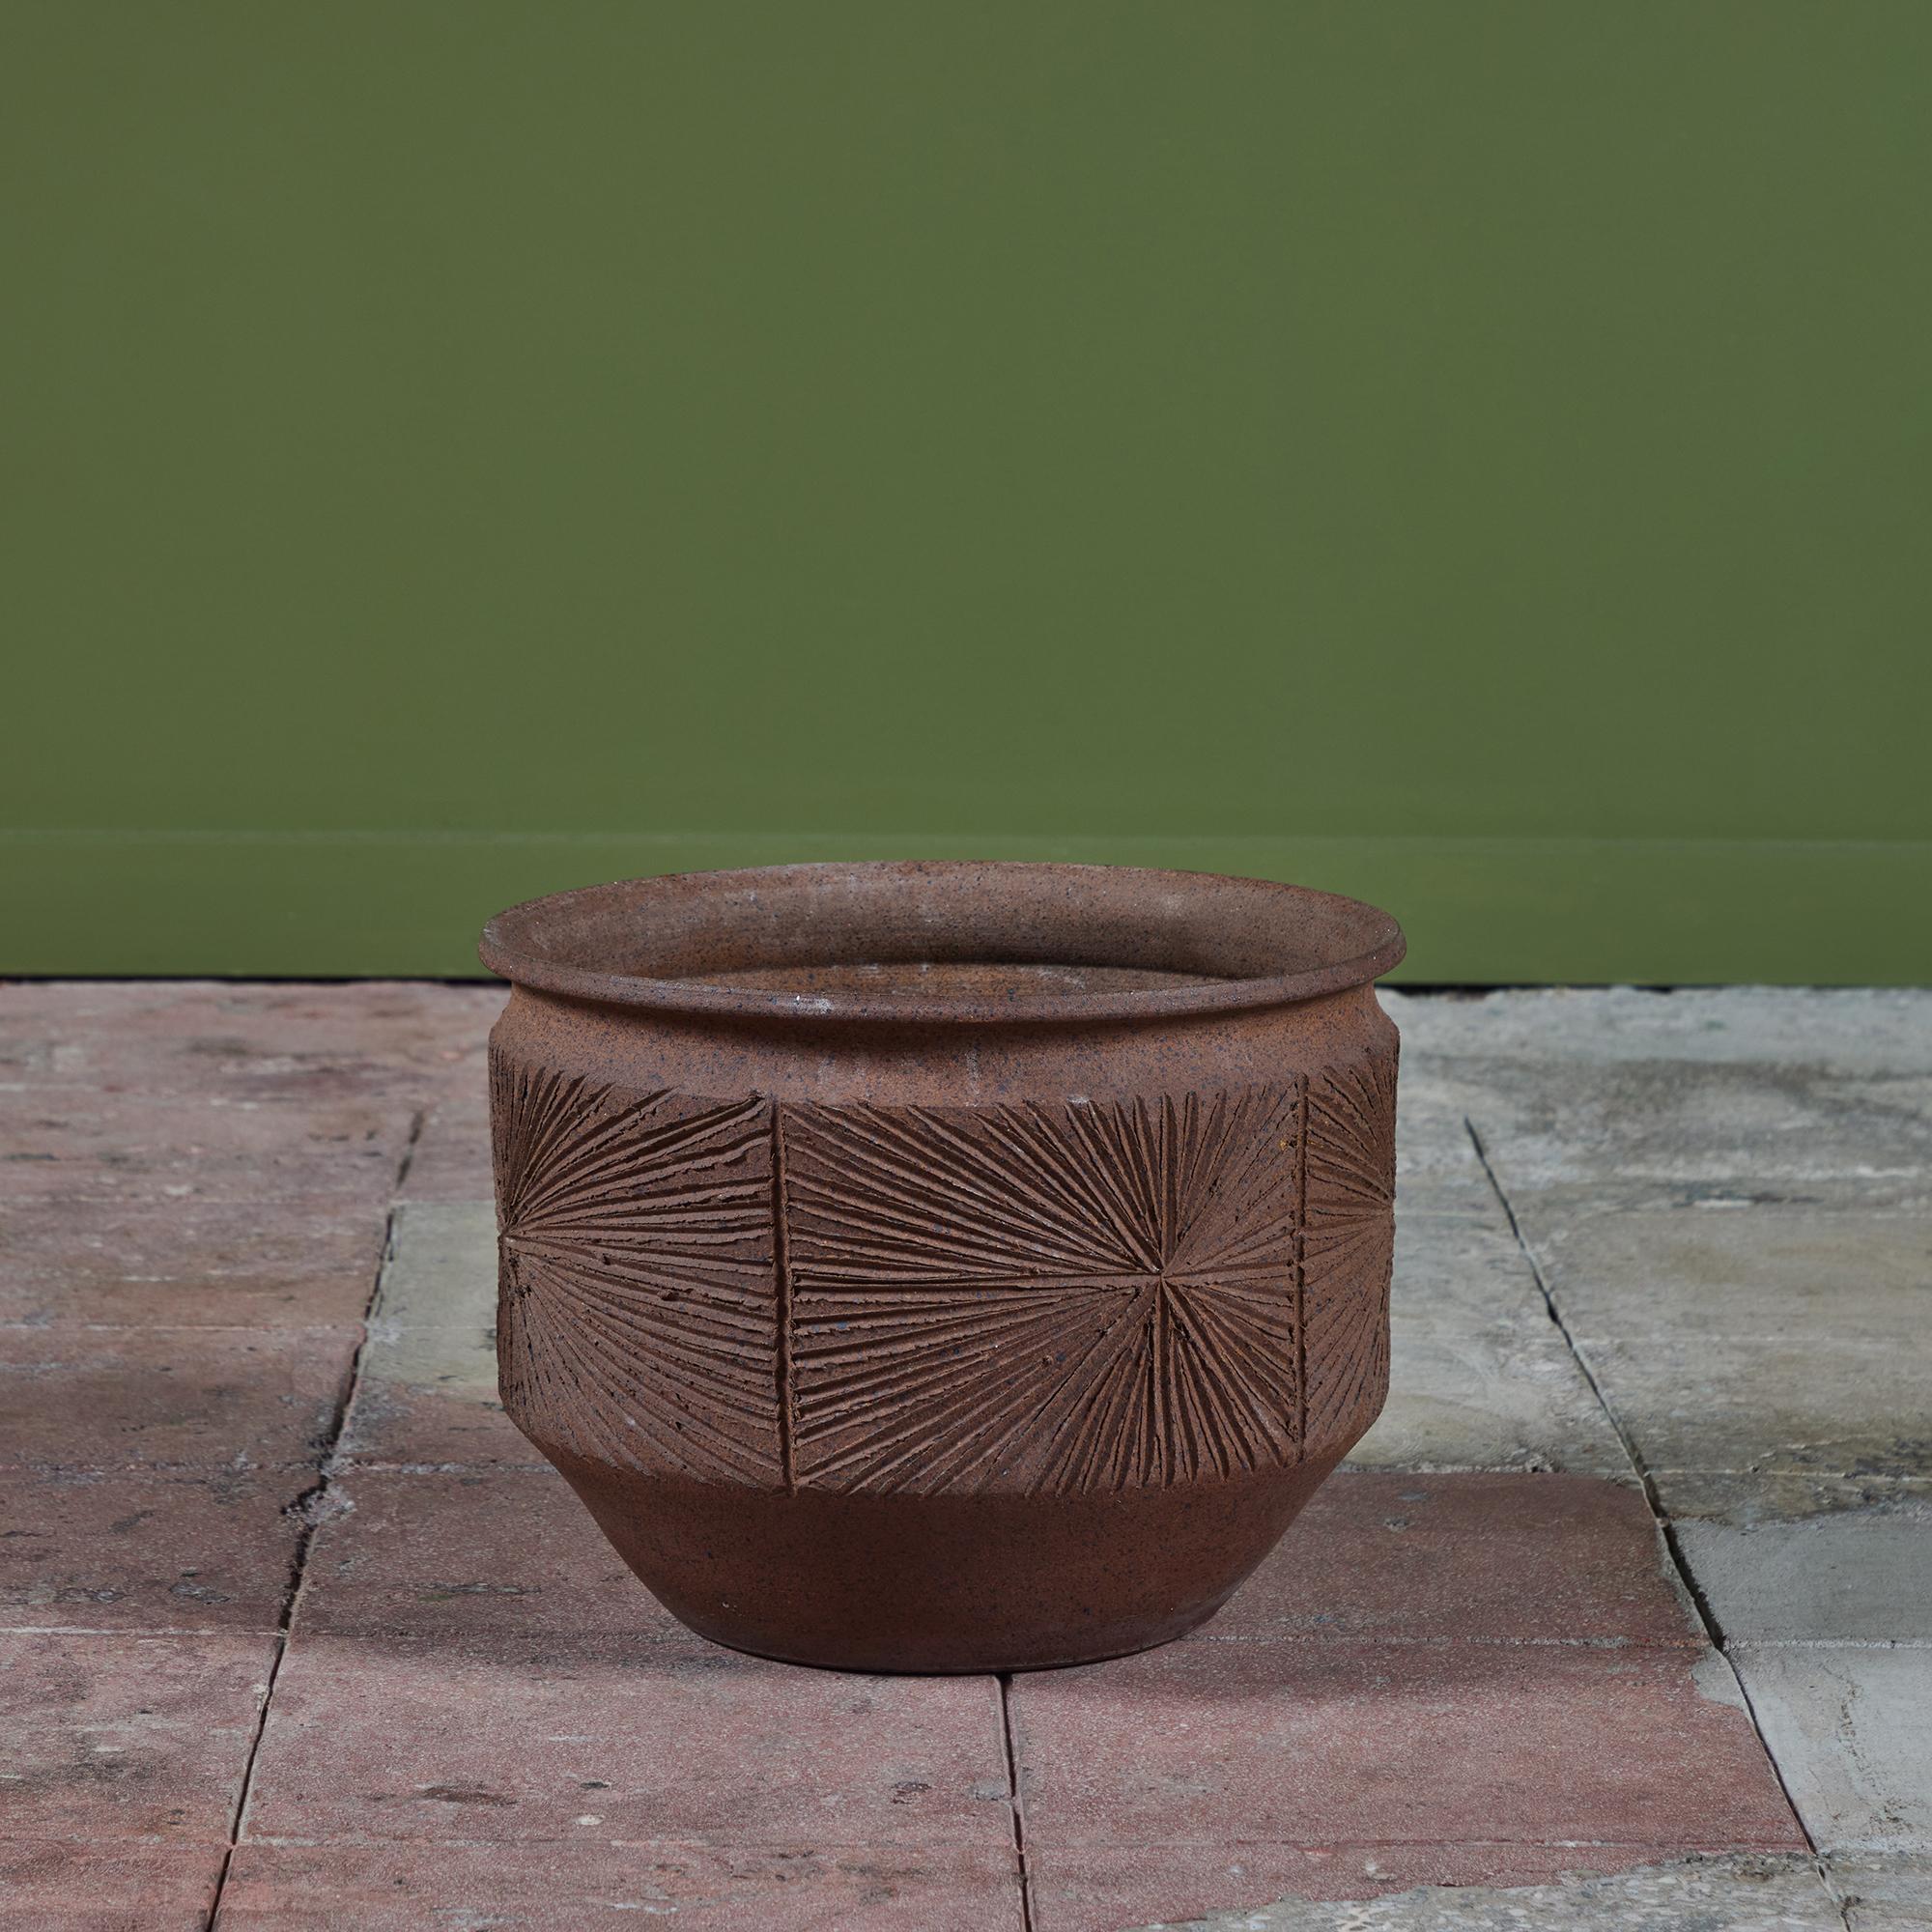 An unglazed stoneware bowl planter from David Cressey and Robert Maxwell's 1970's collaboration, Earthgender. The 15.5